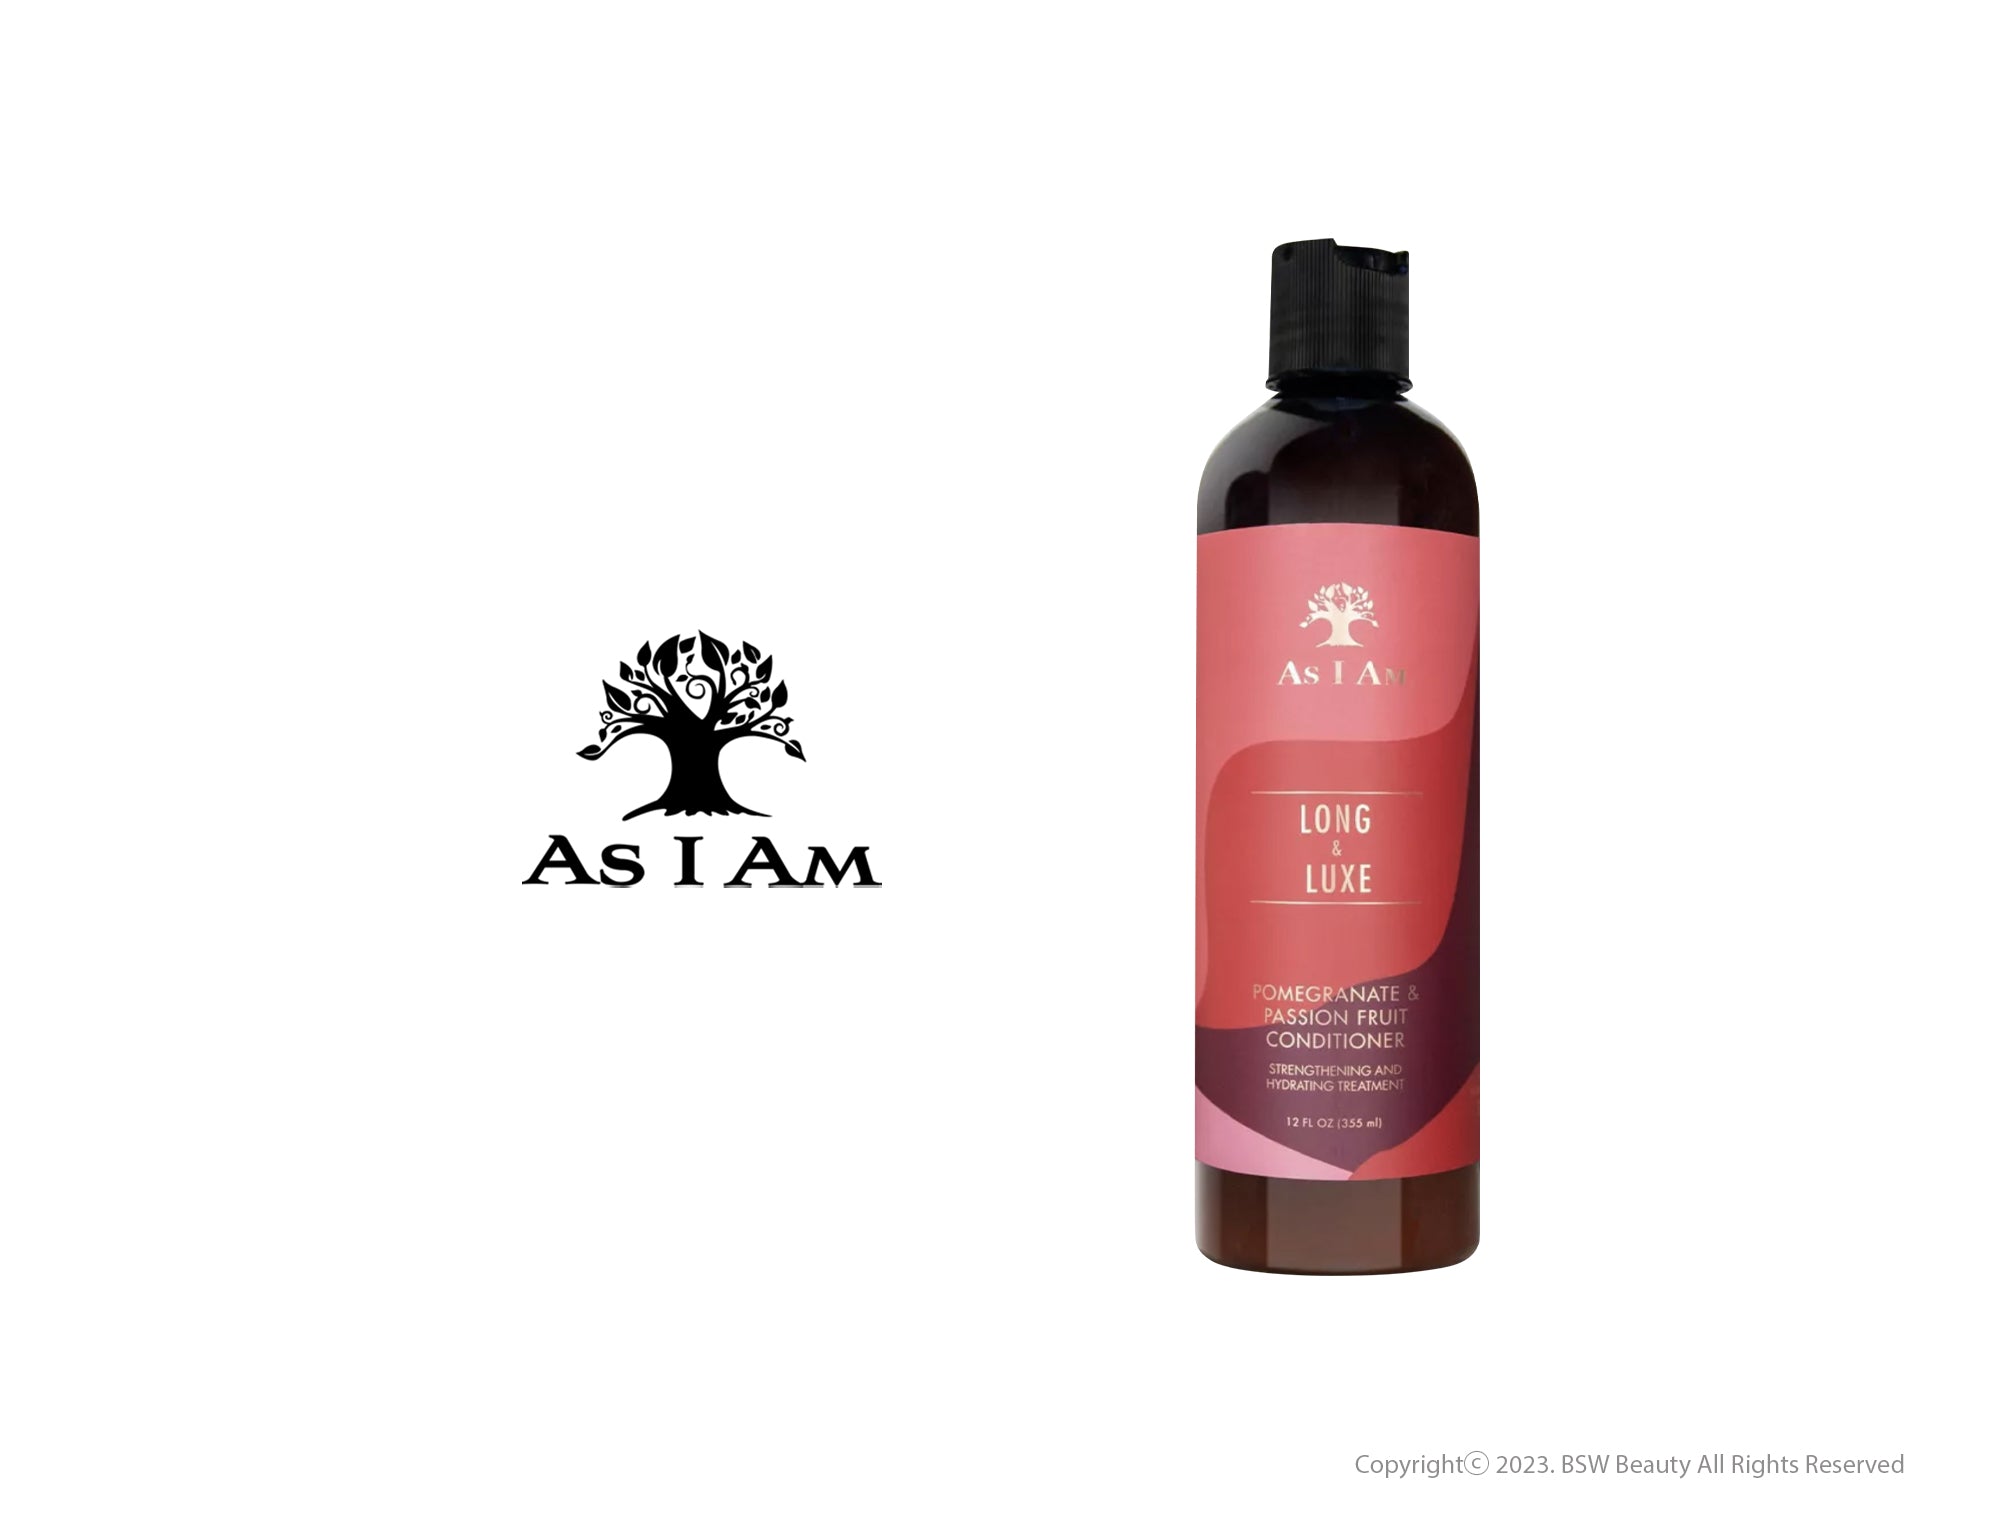 AS I AM LONG AND LUXE POMEGRANATE & PASSION FRUIT CONDITIONER 12OZ